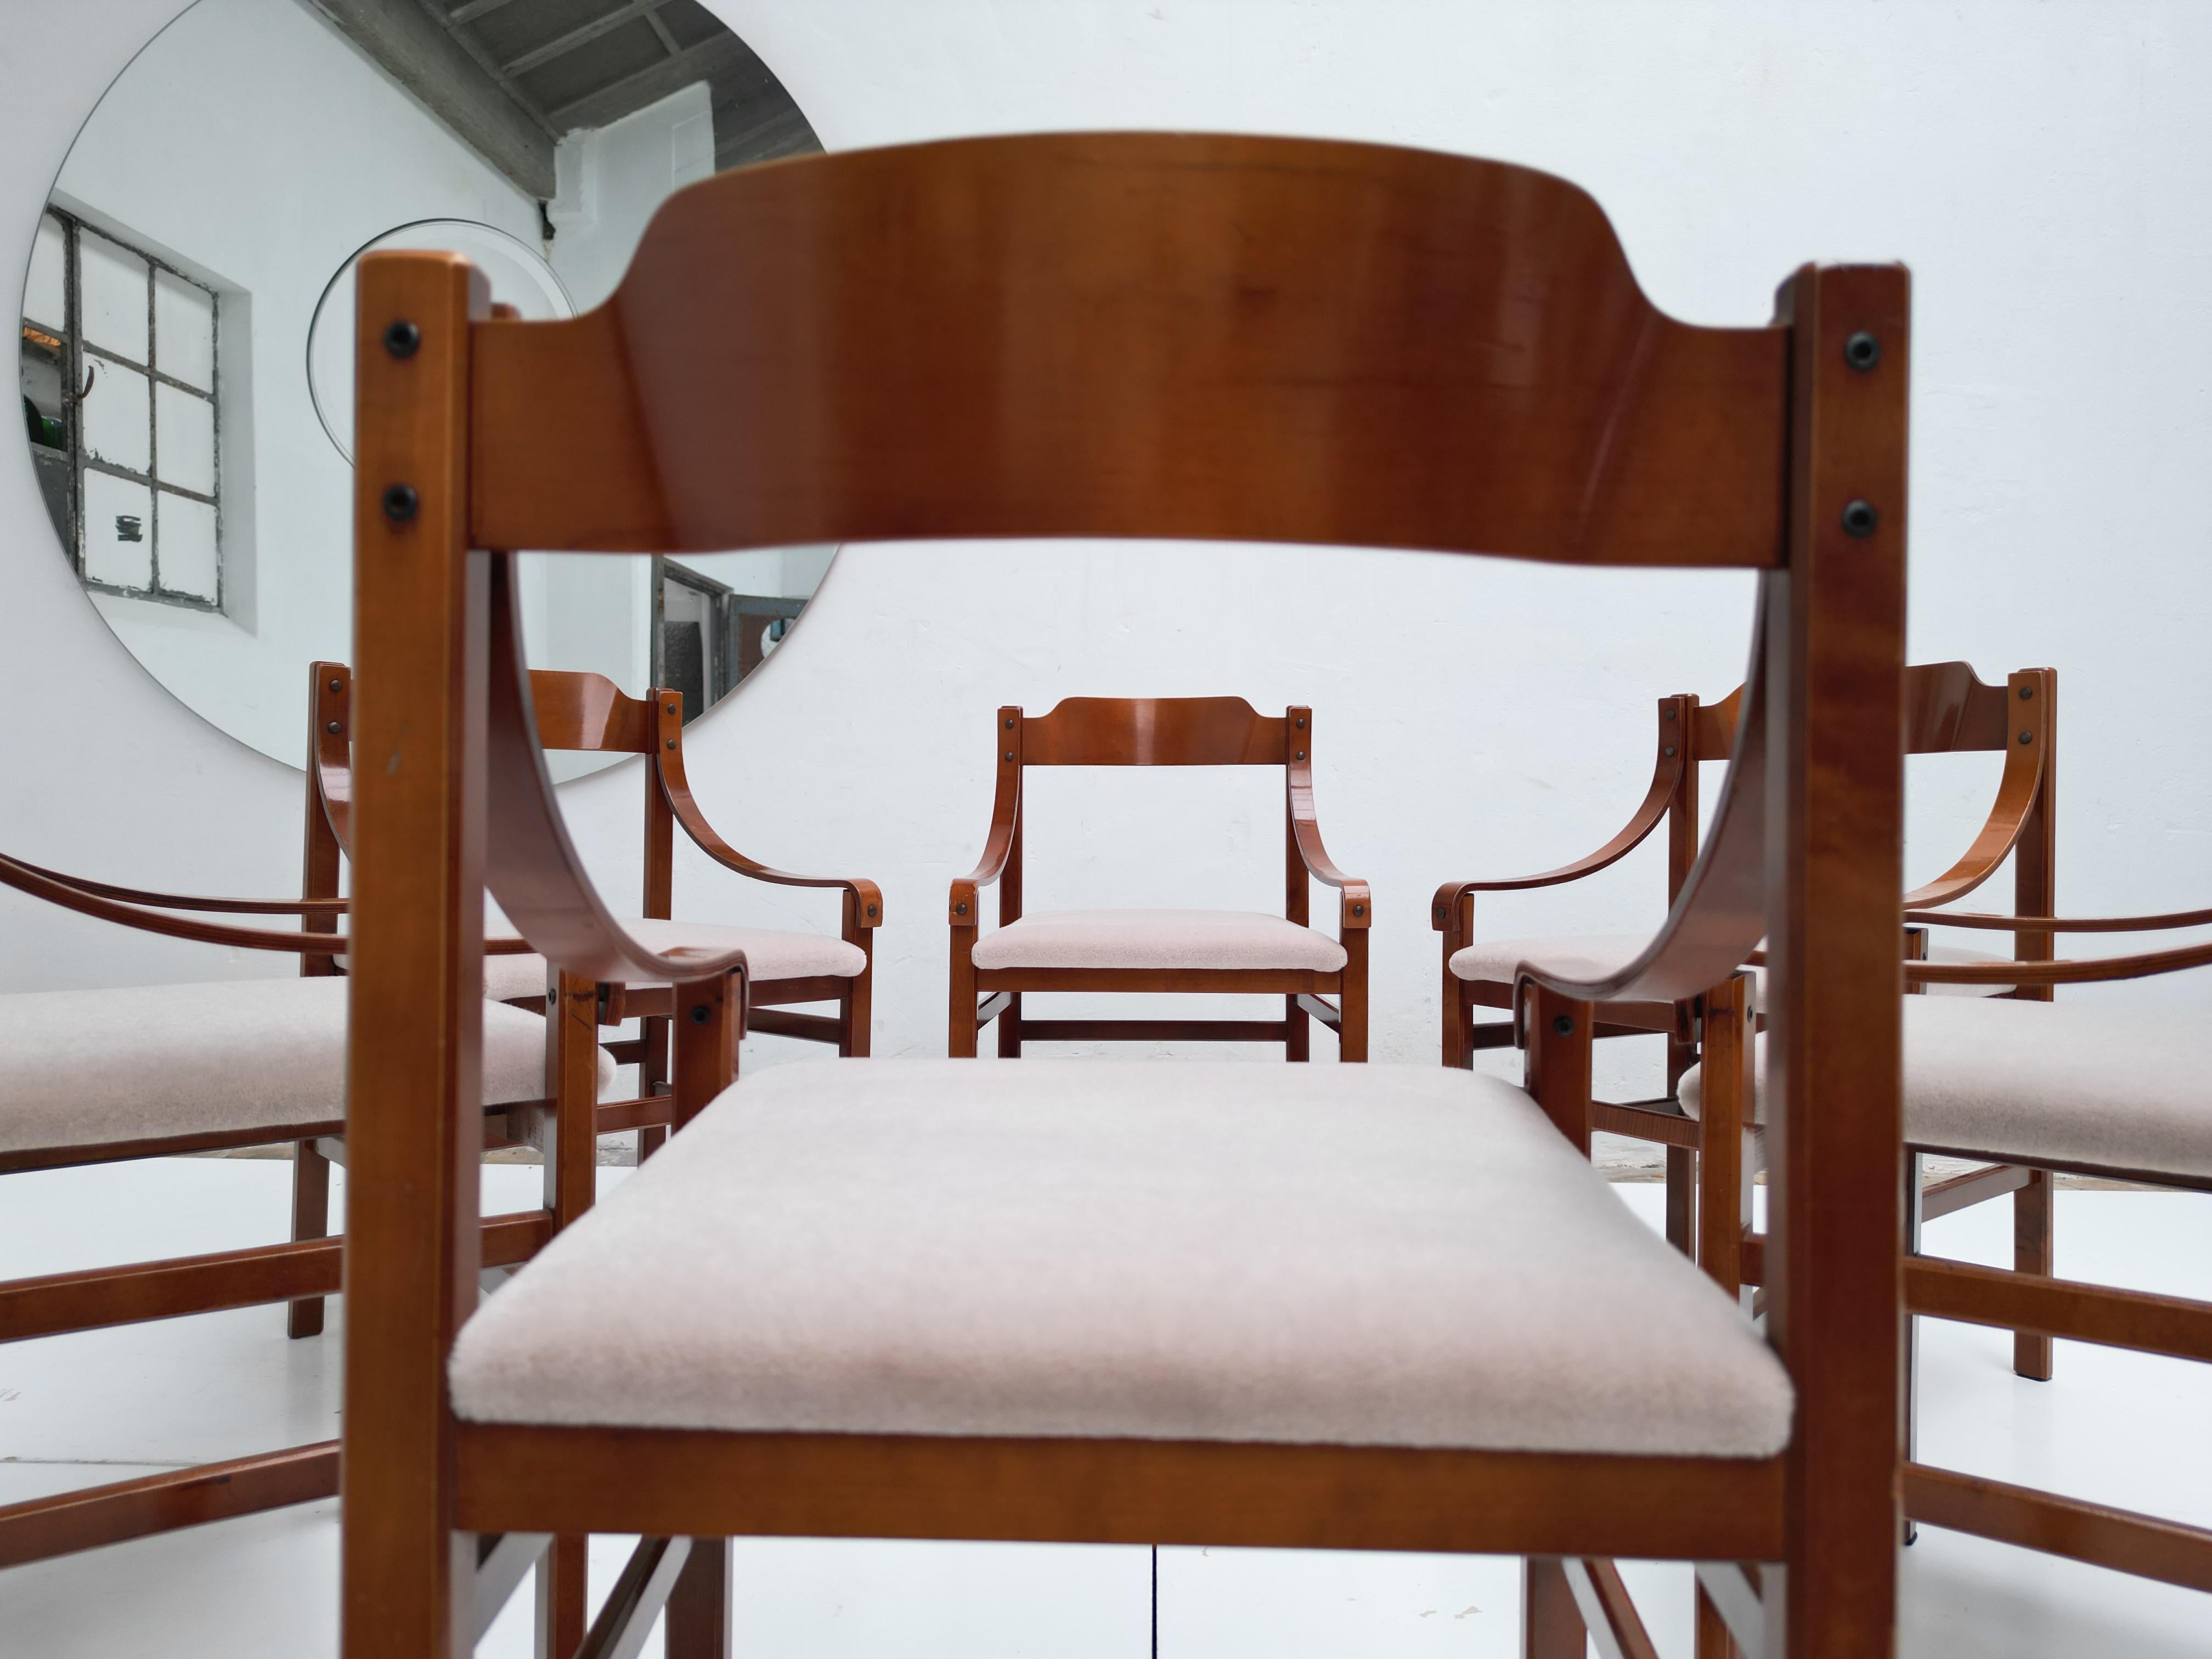 Rare set of 6 Italian dining chairs with beautiful plywood curved detailing from the 1960's

The chairs have been newly reupholstered with Top Quality Cradle to Cradle® Bronze-certified sustainable mohair velvet upholstery fabric with an extreme